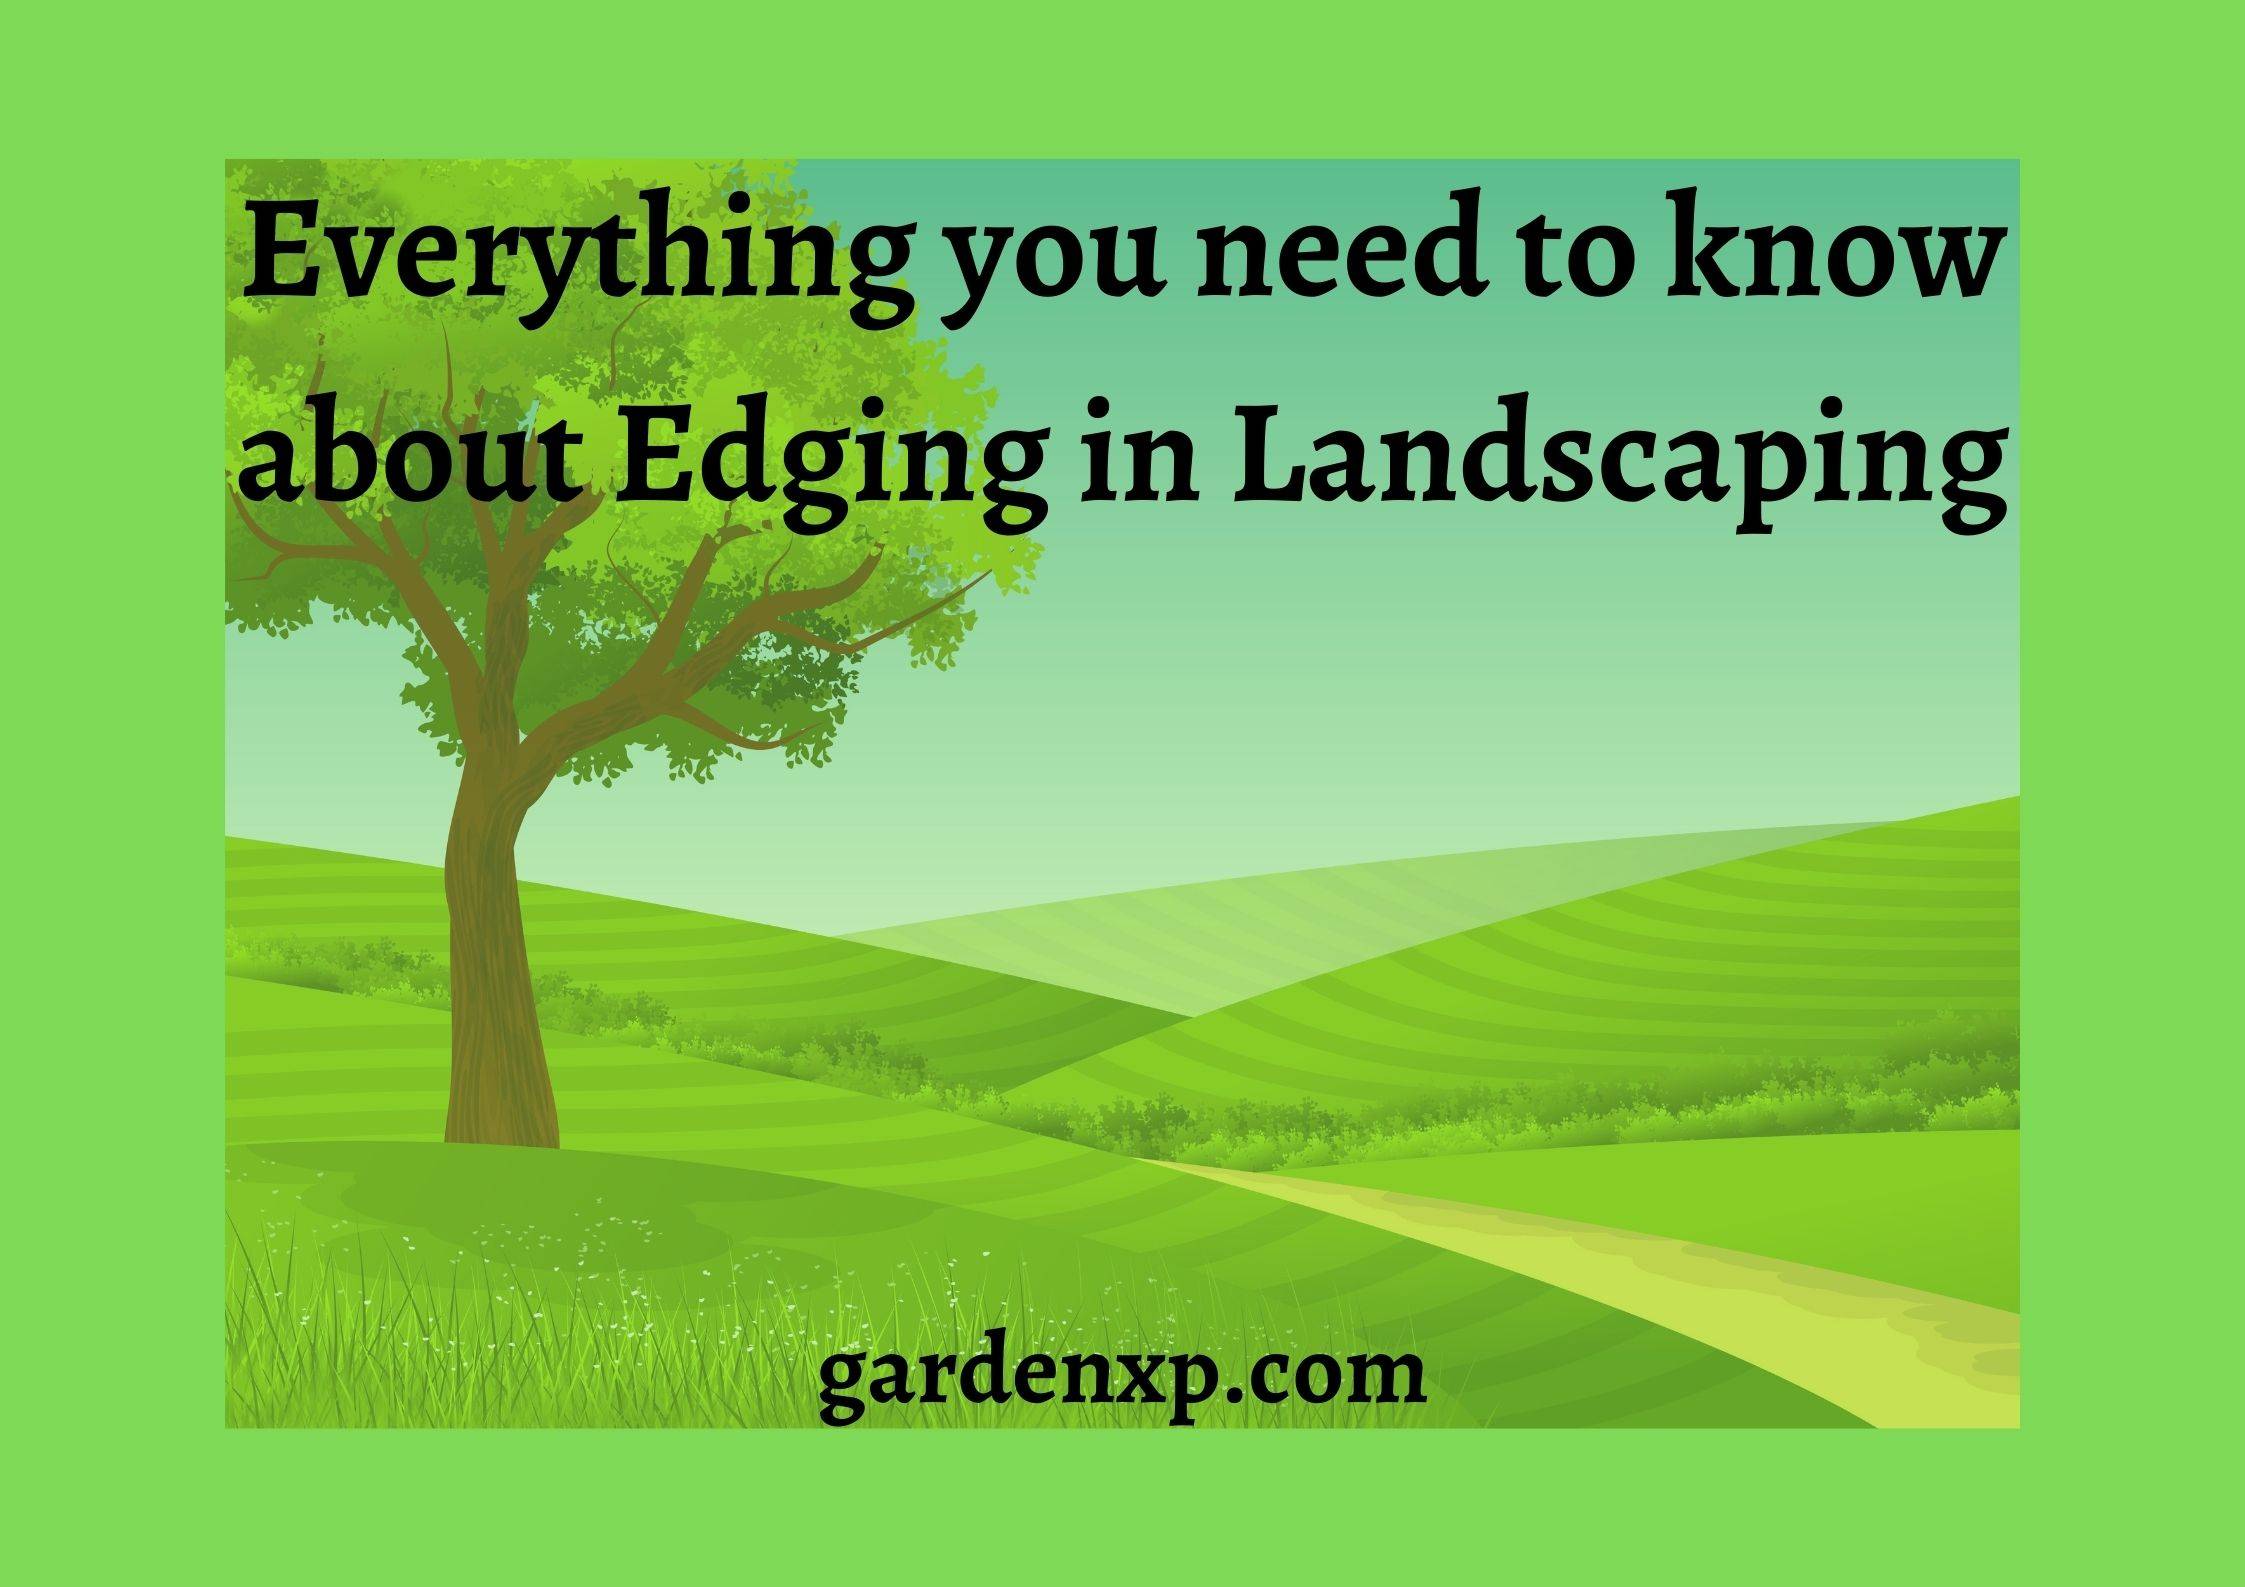 What is Edging in Landscaping?